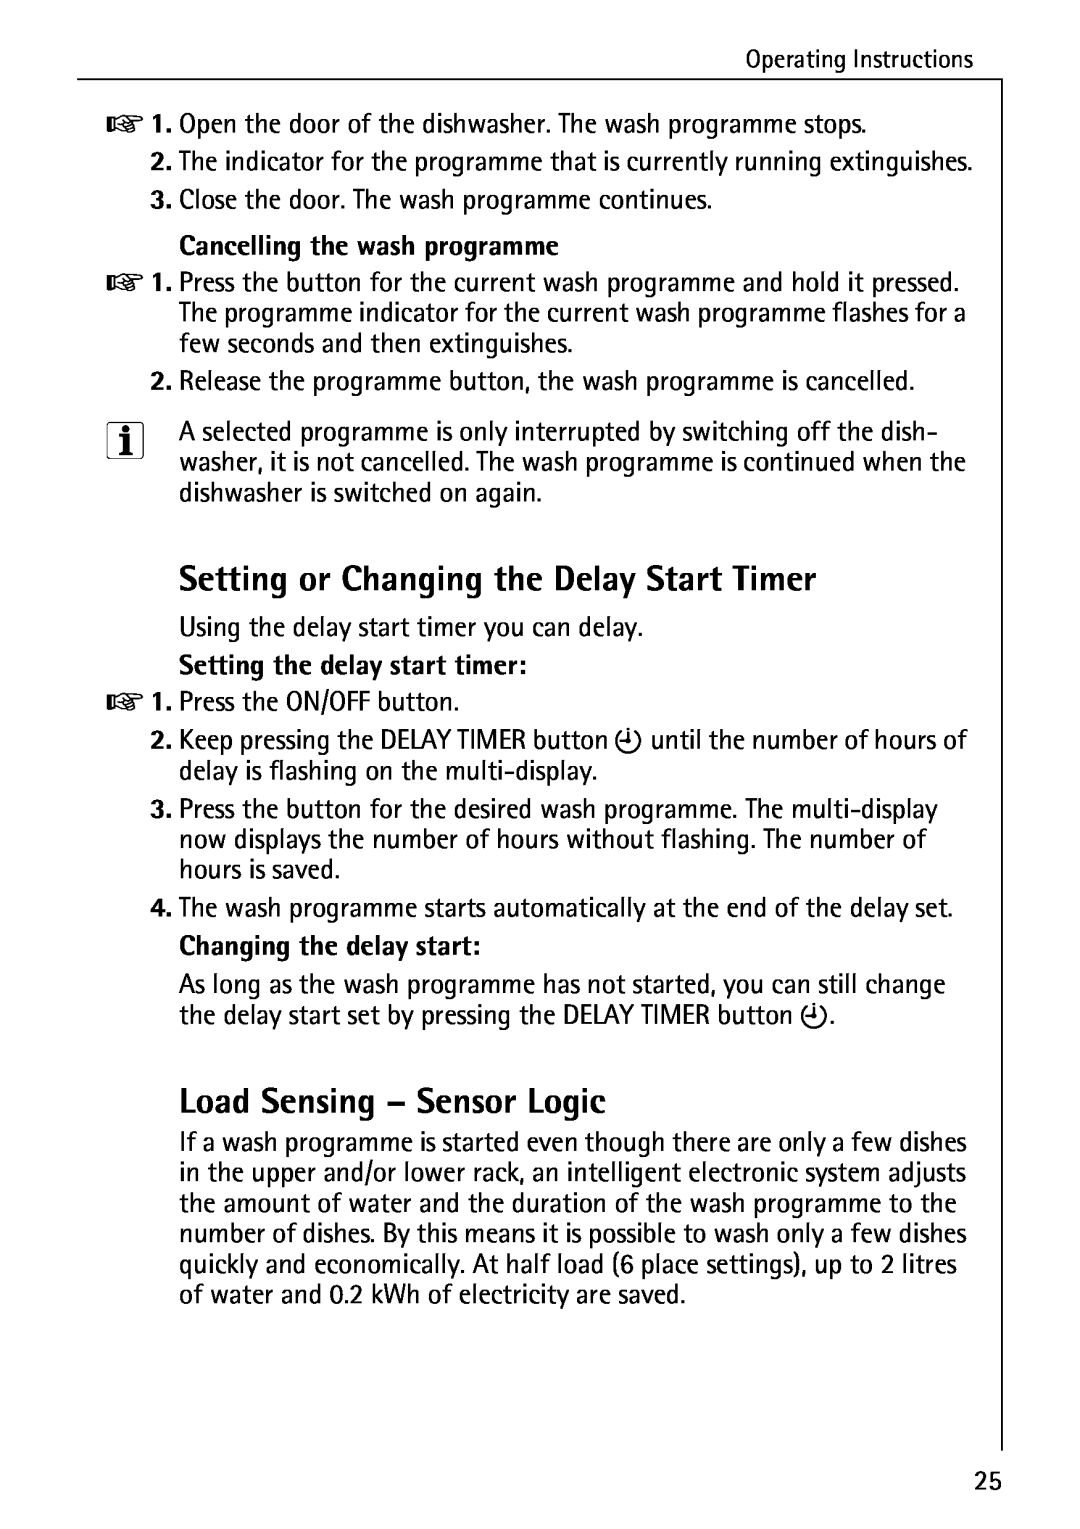 AEG 3A manual Setting or Changing the Delay Start Timer, Load Sensing - Sensor Logic, Cancelling the wash programme 